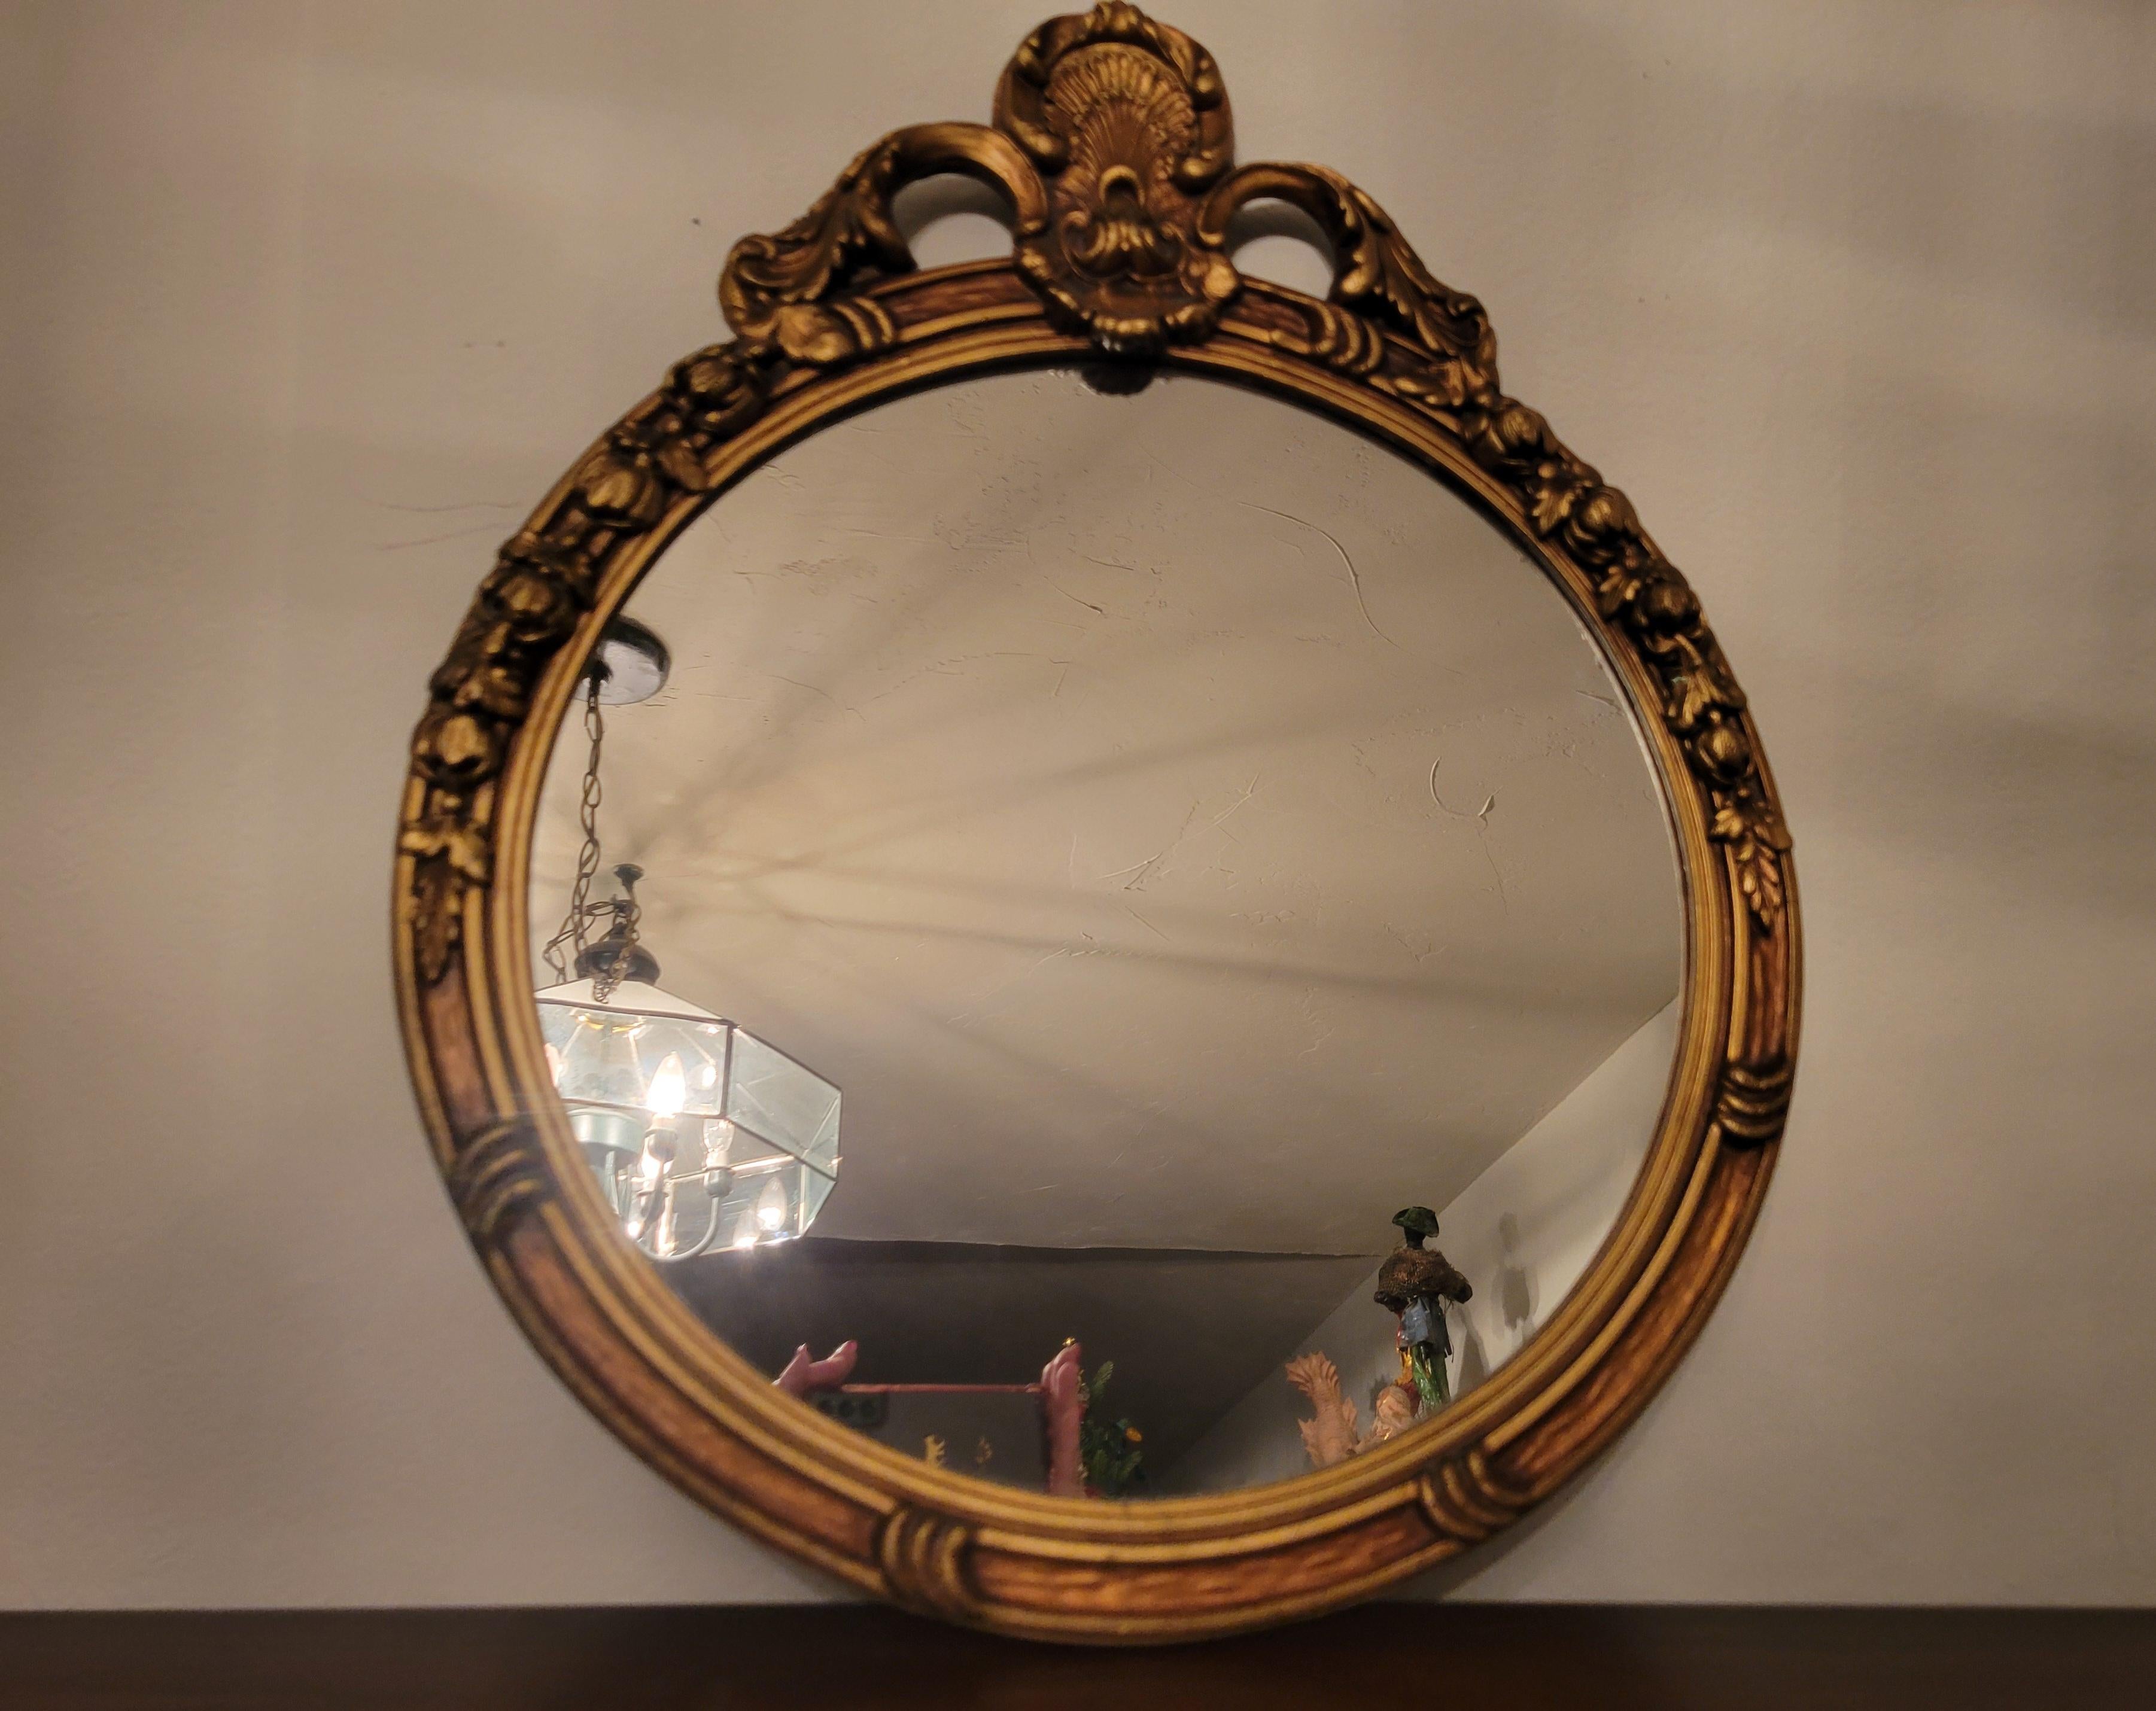 Antique mirror in a hand-carved guilded wooden frame.  The mirror with the frame is 18